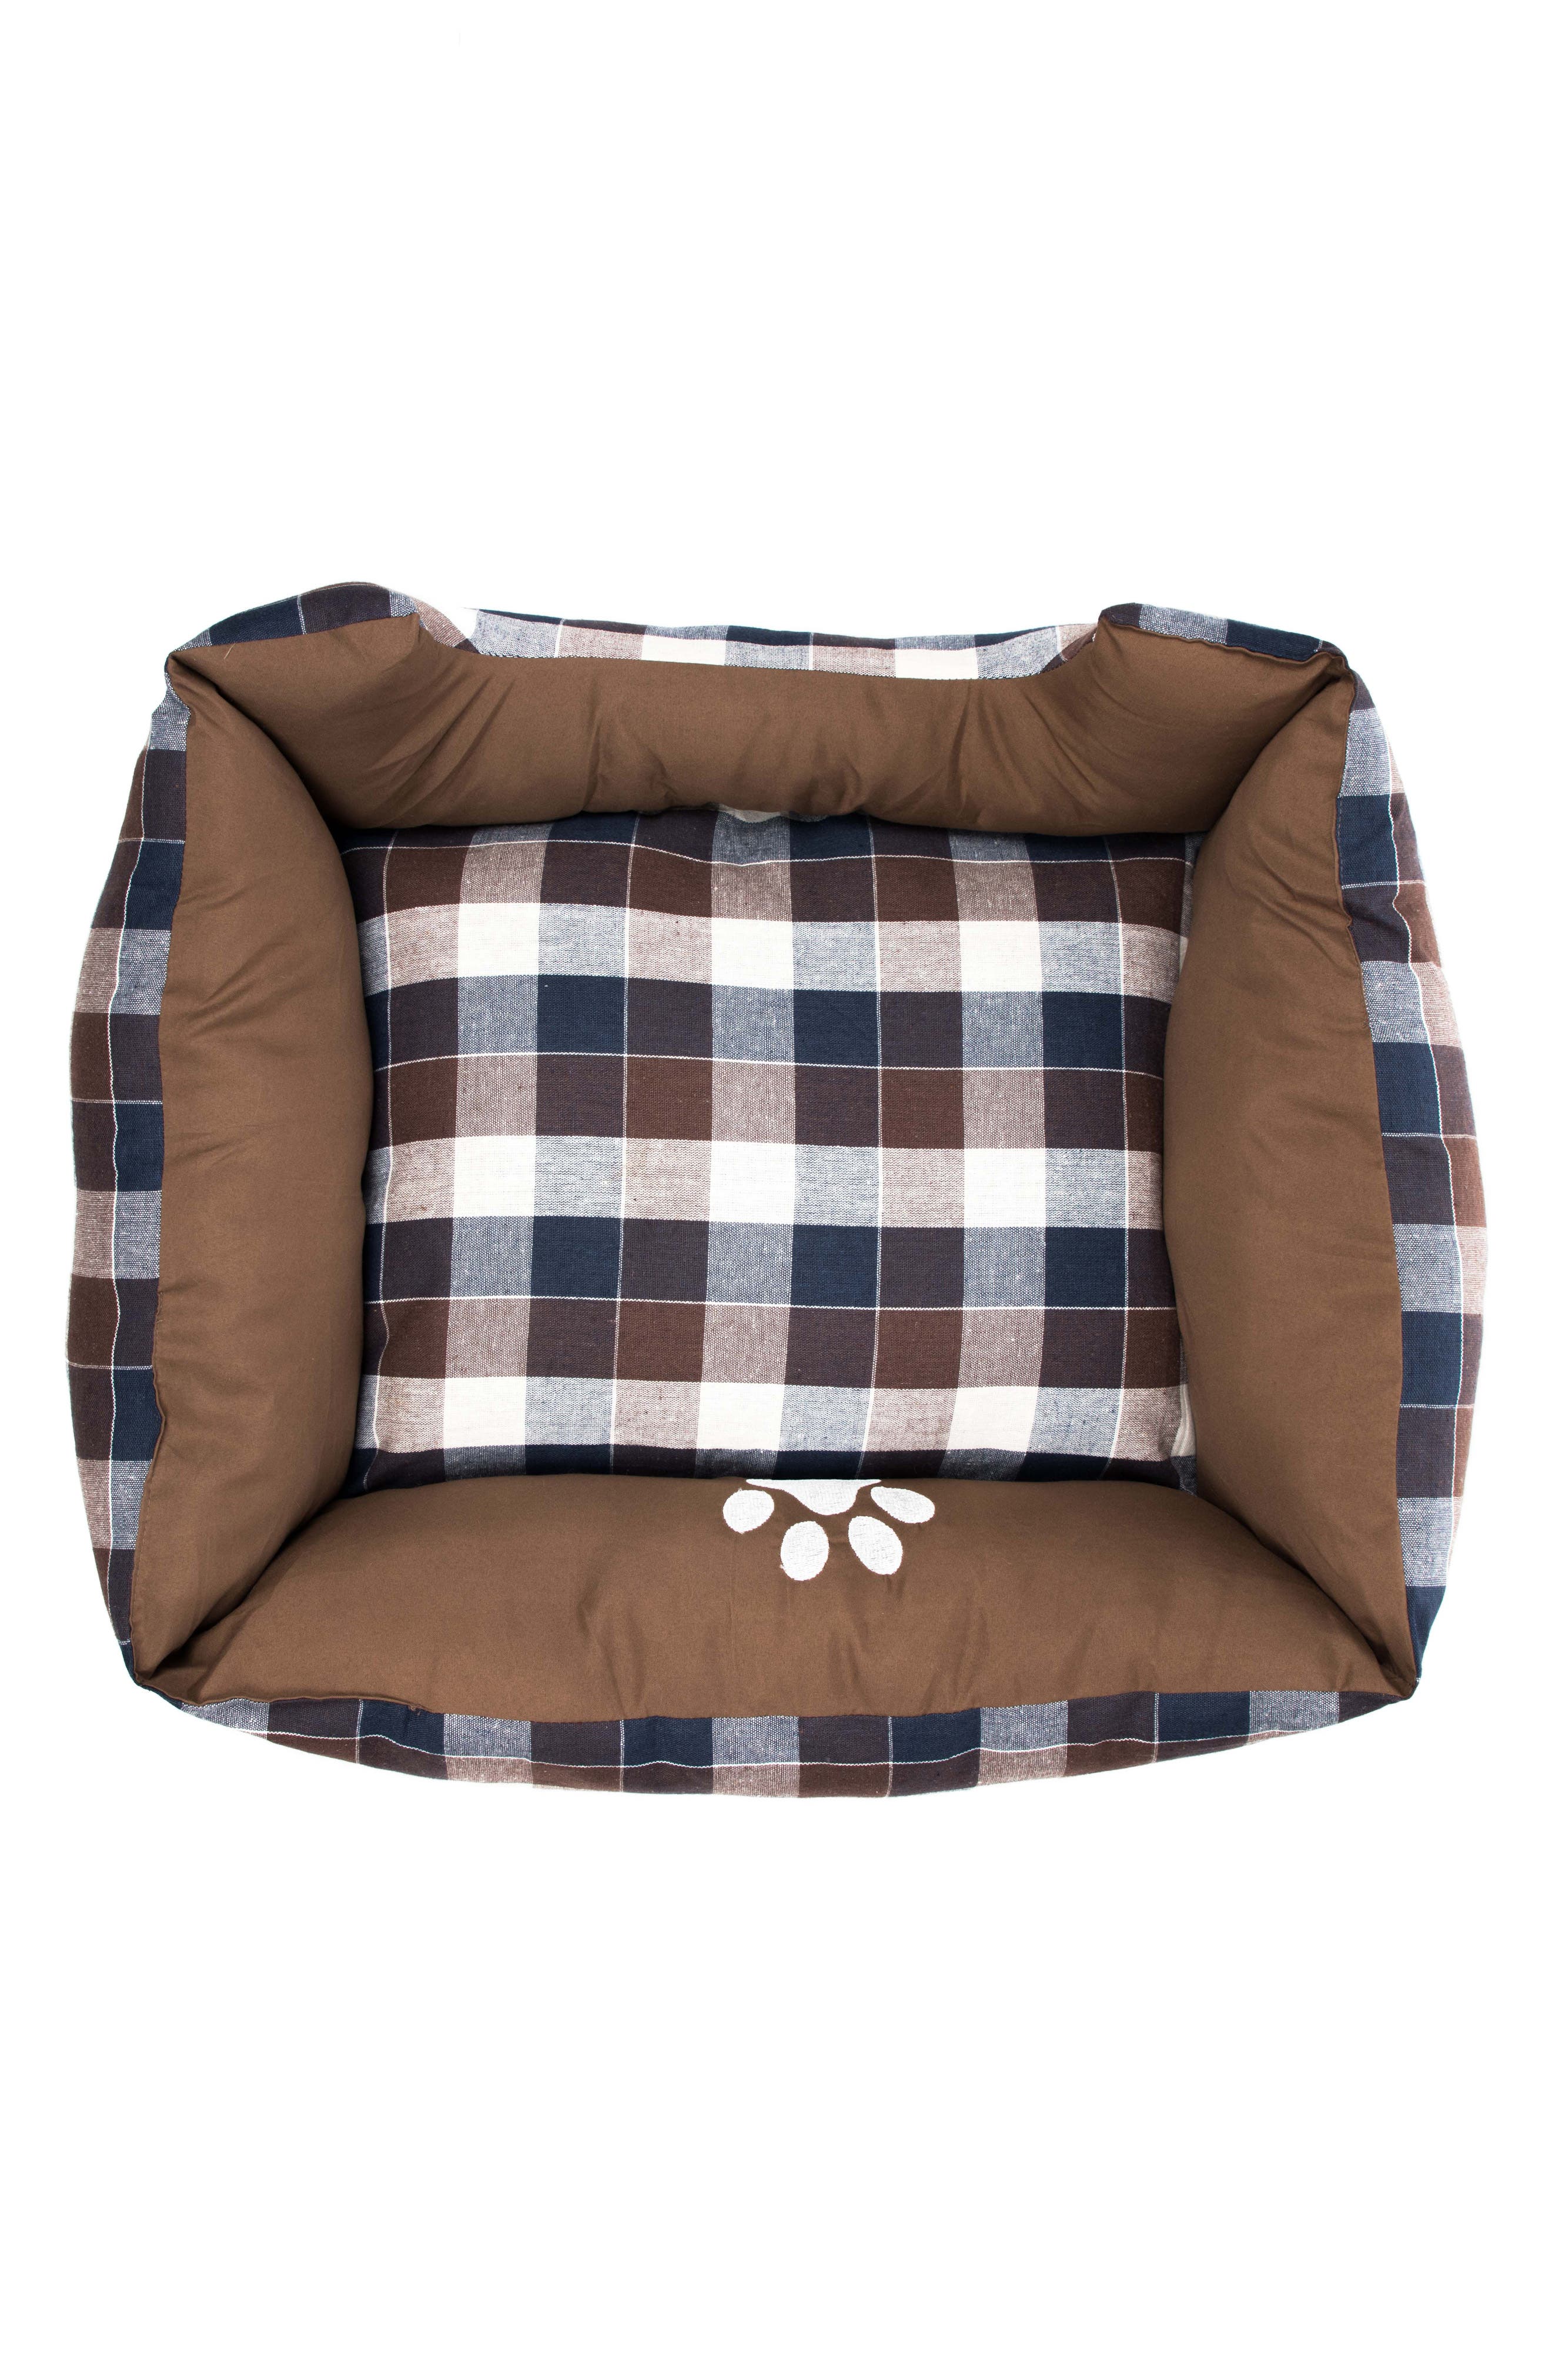 Duck River Textile Hasley Chocolate Plaid Square Pet Bed